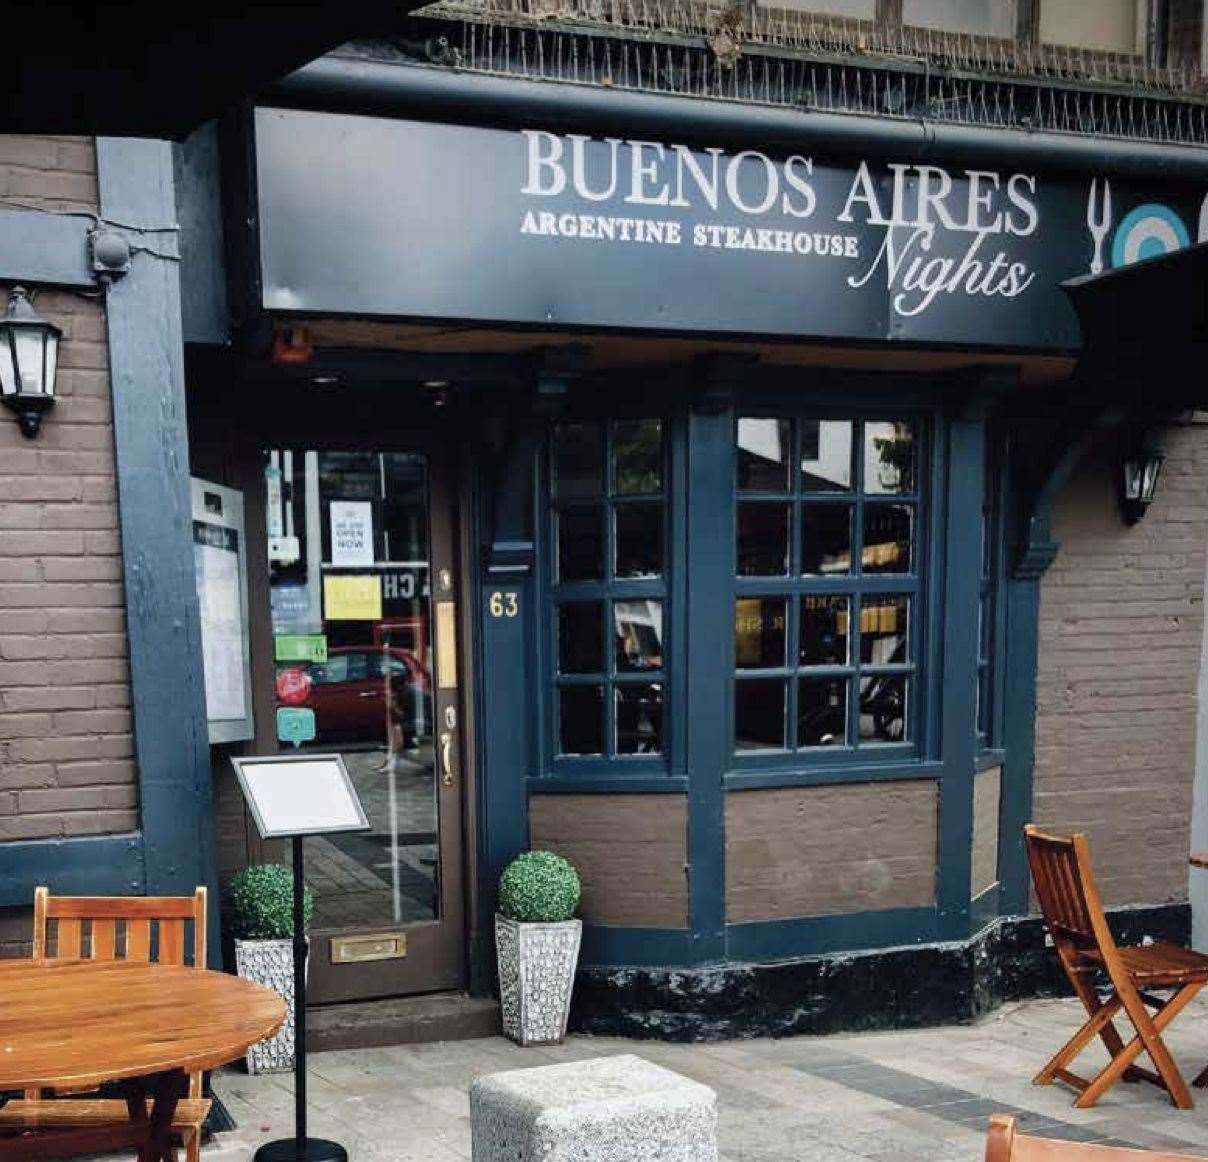 The company’s Maidstone restaurant Pic: Buenos Aires Nights